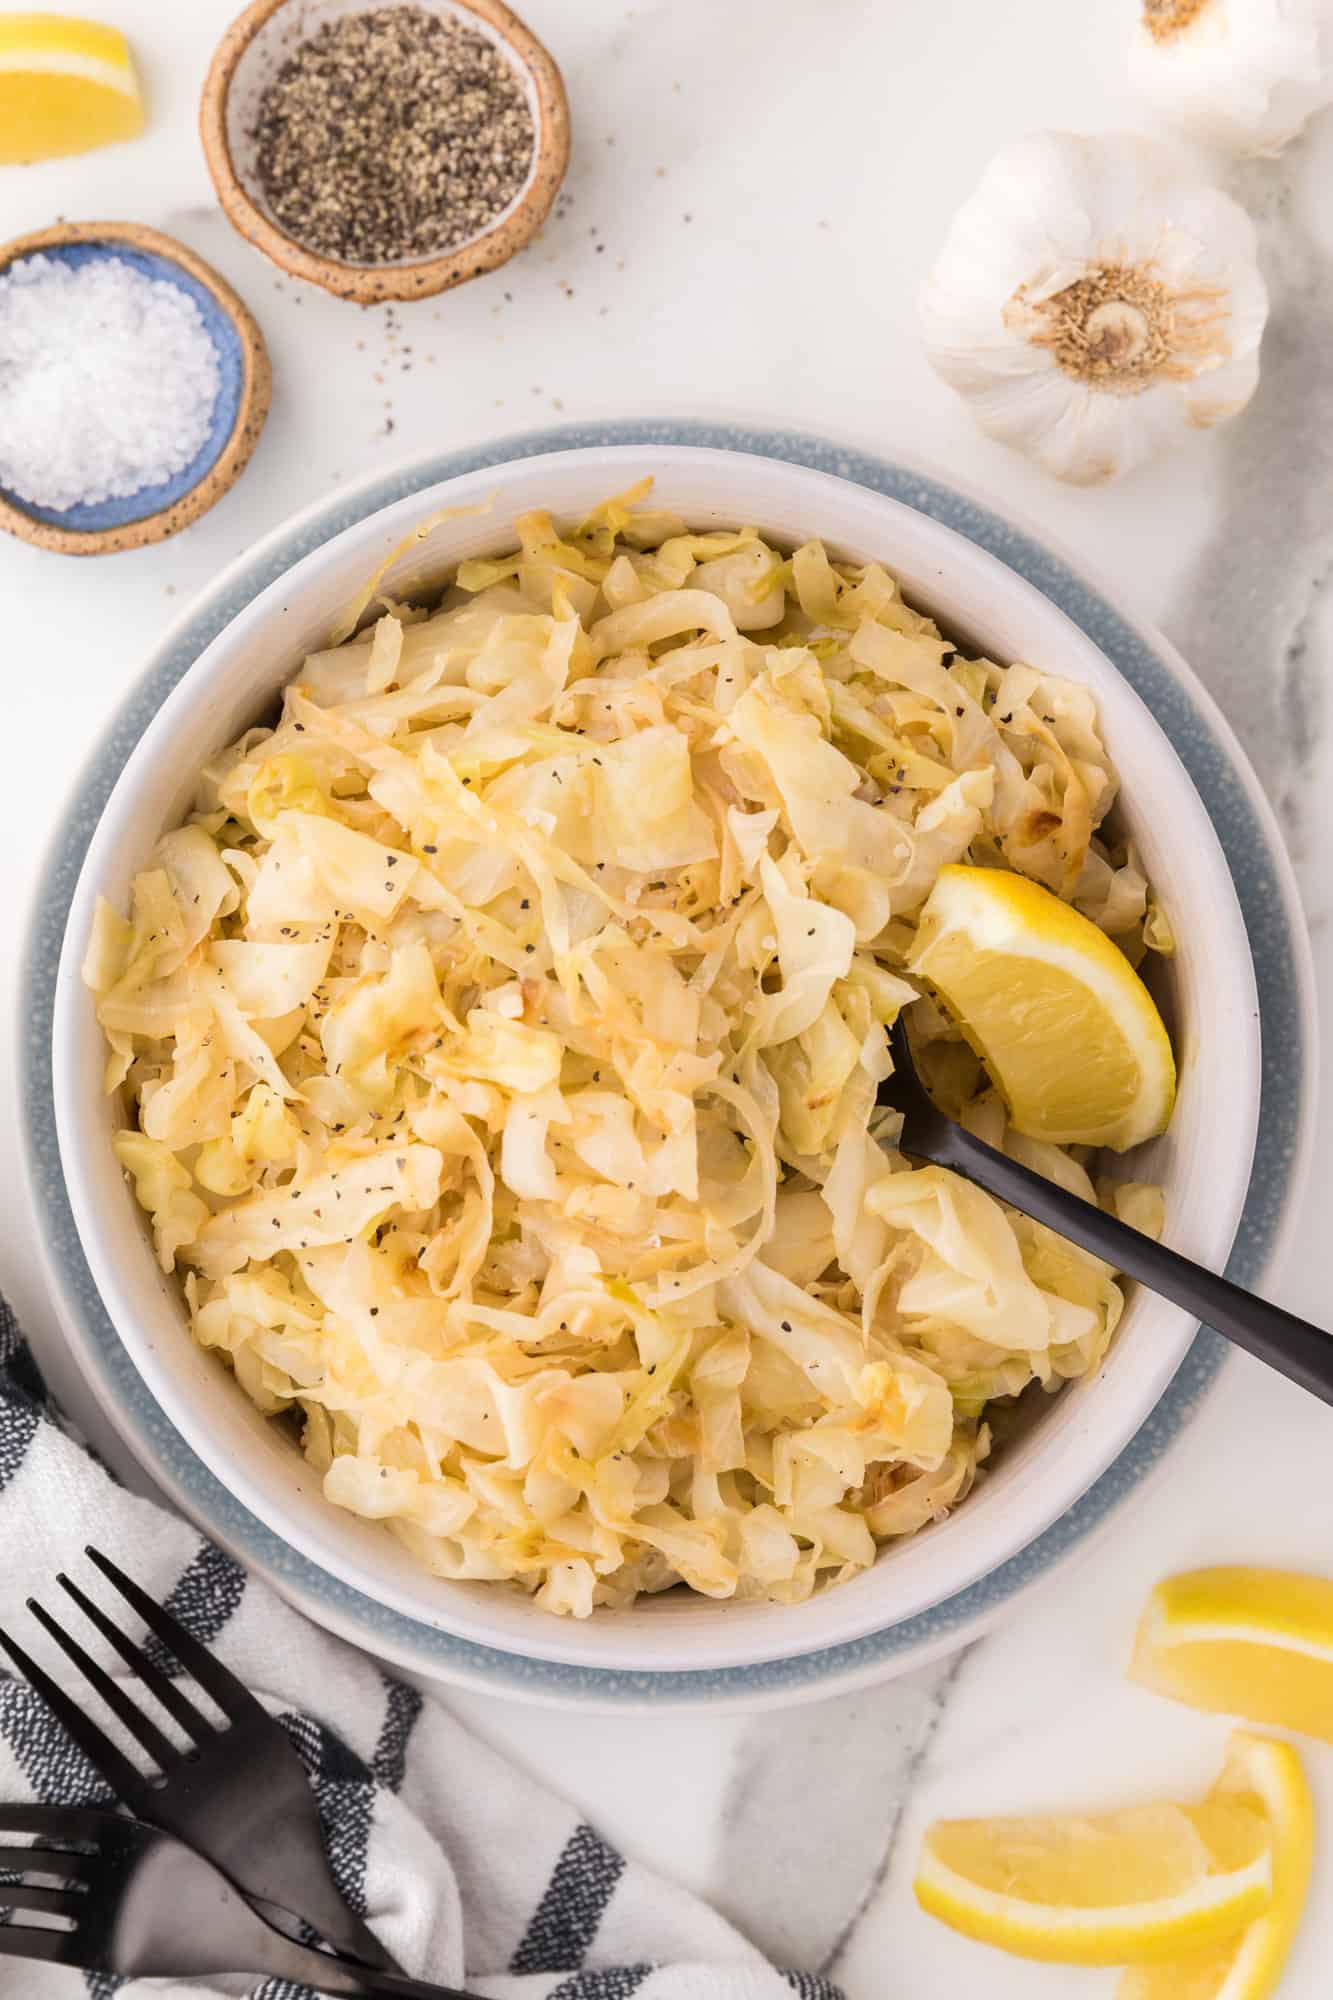 Sautéed cabbage in a large bowl with lemon wedges.